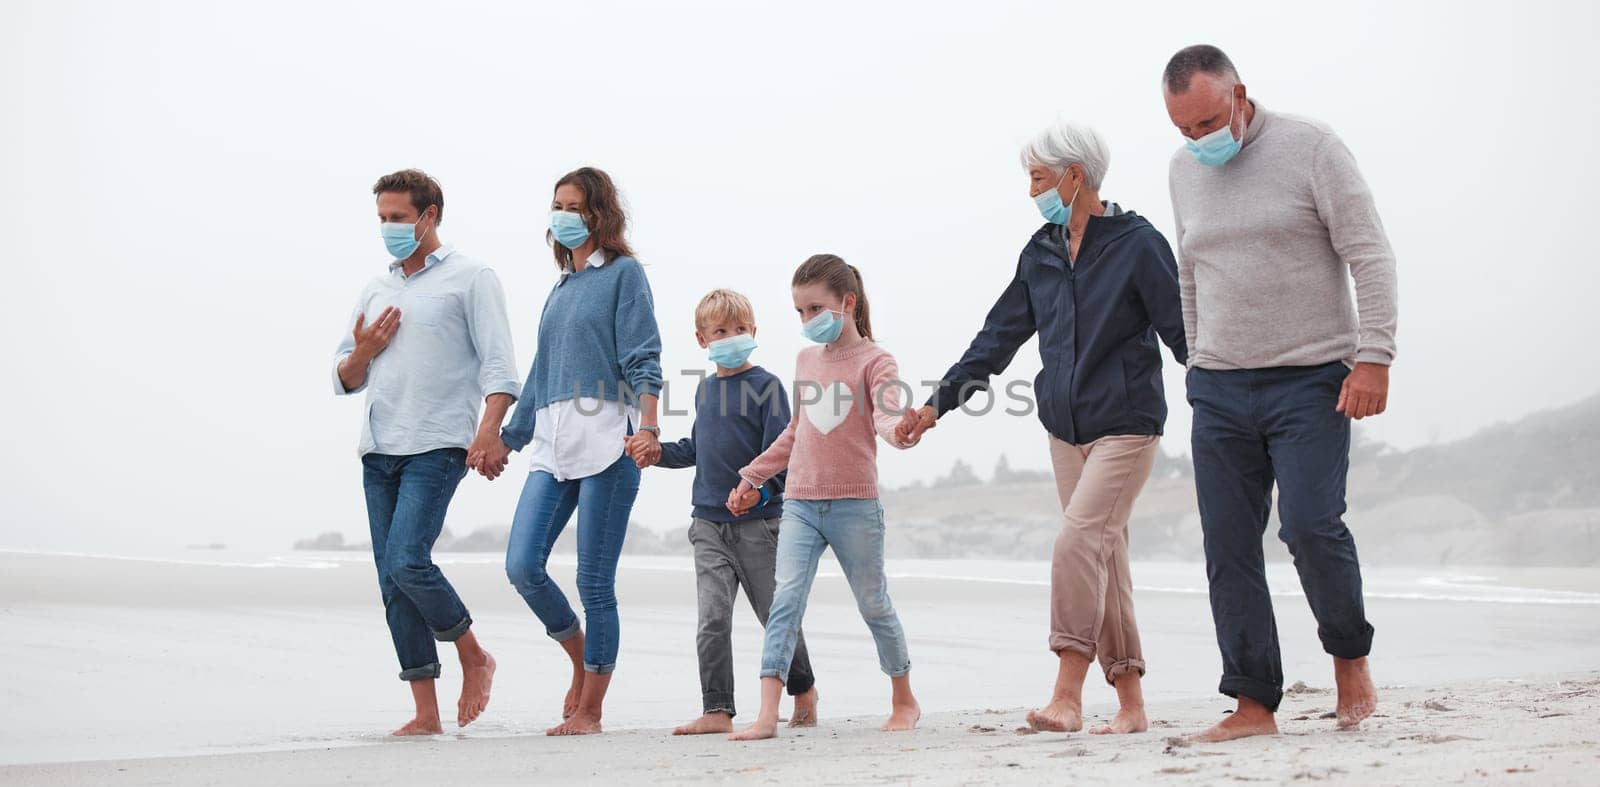 Big family, covid and holding hands walking on beach for quality bonding time together during pandemic in nature. Hand of parents, grandparents and kids in travel, freedom and family walk with masks by YuriArcurs